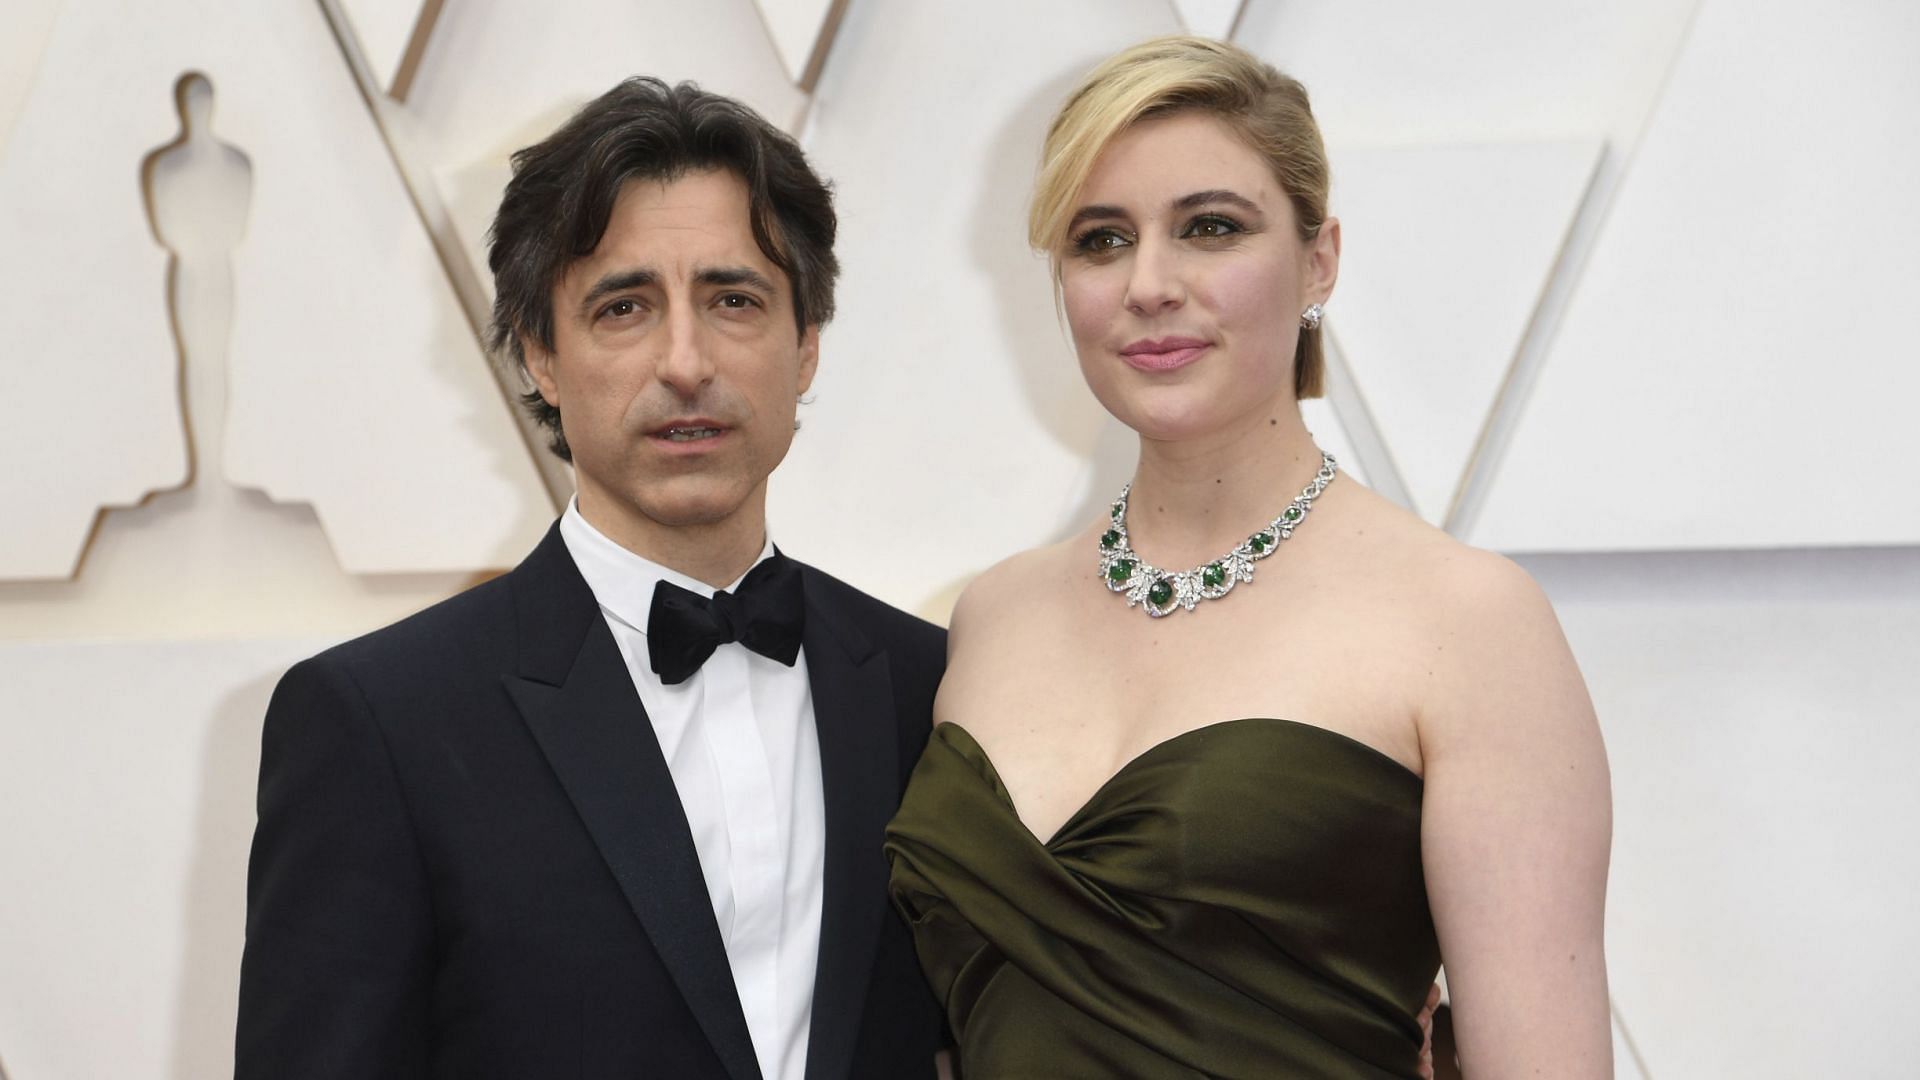 Greta Gerwig and Noah Baumbach expecting a second child (image via Getty/Richard Shottwell)